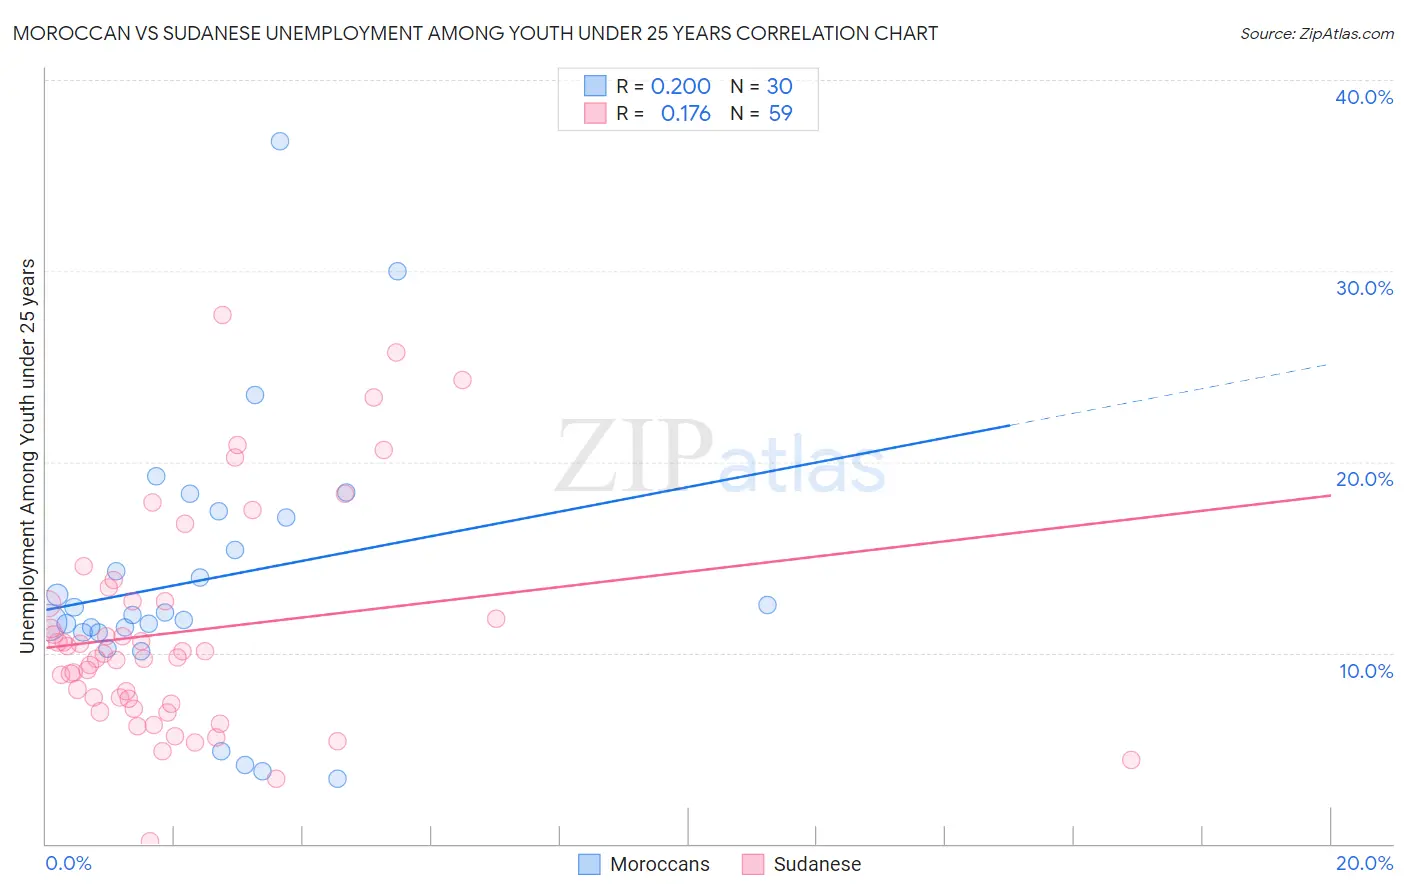 Moroccan vs Sudanese Unemployment Among Youth under 25 years